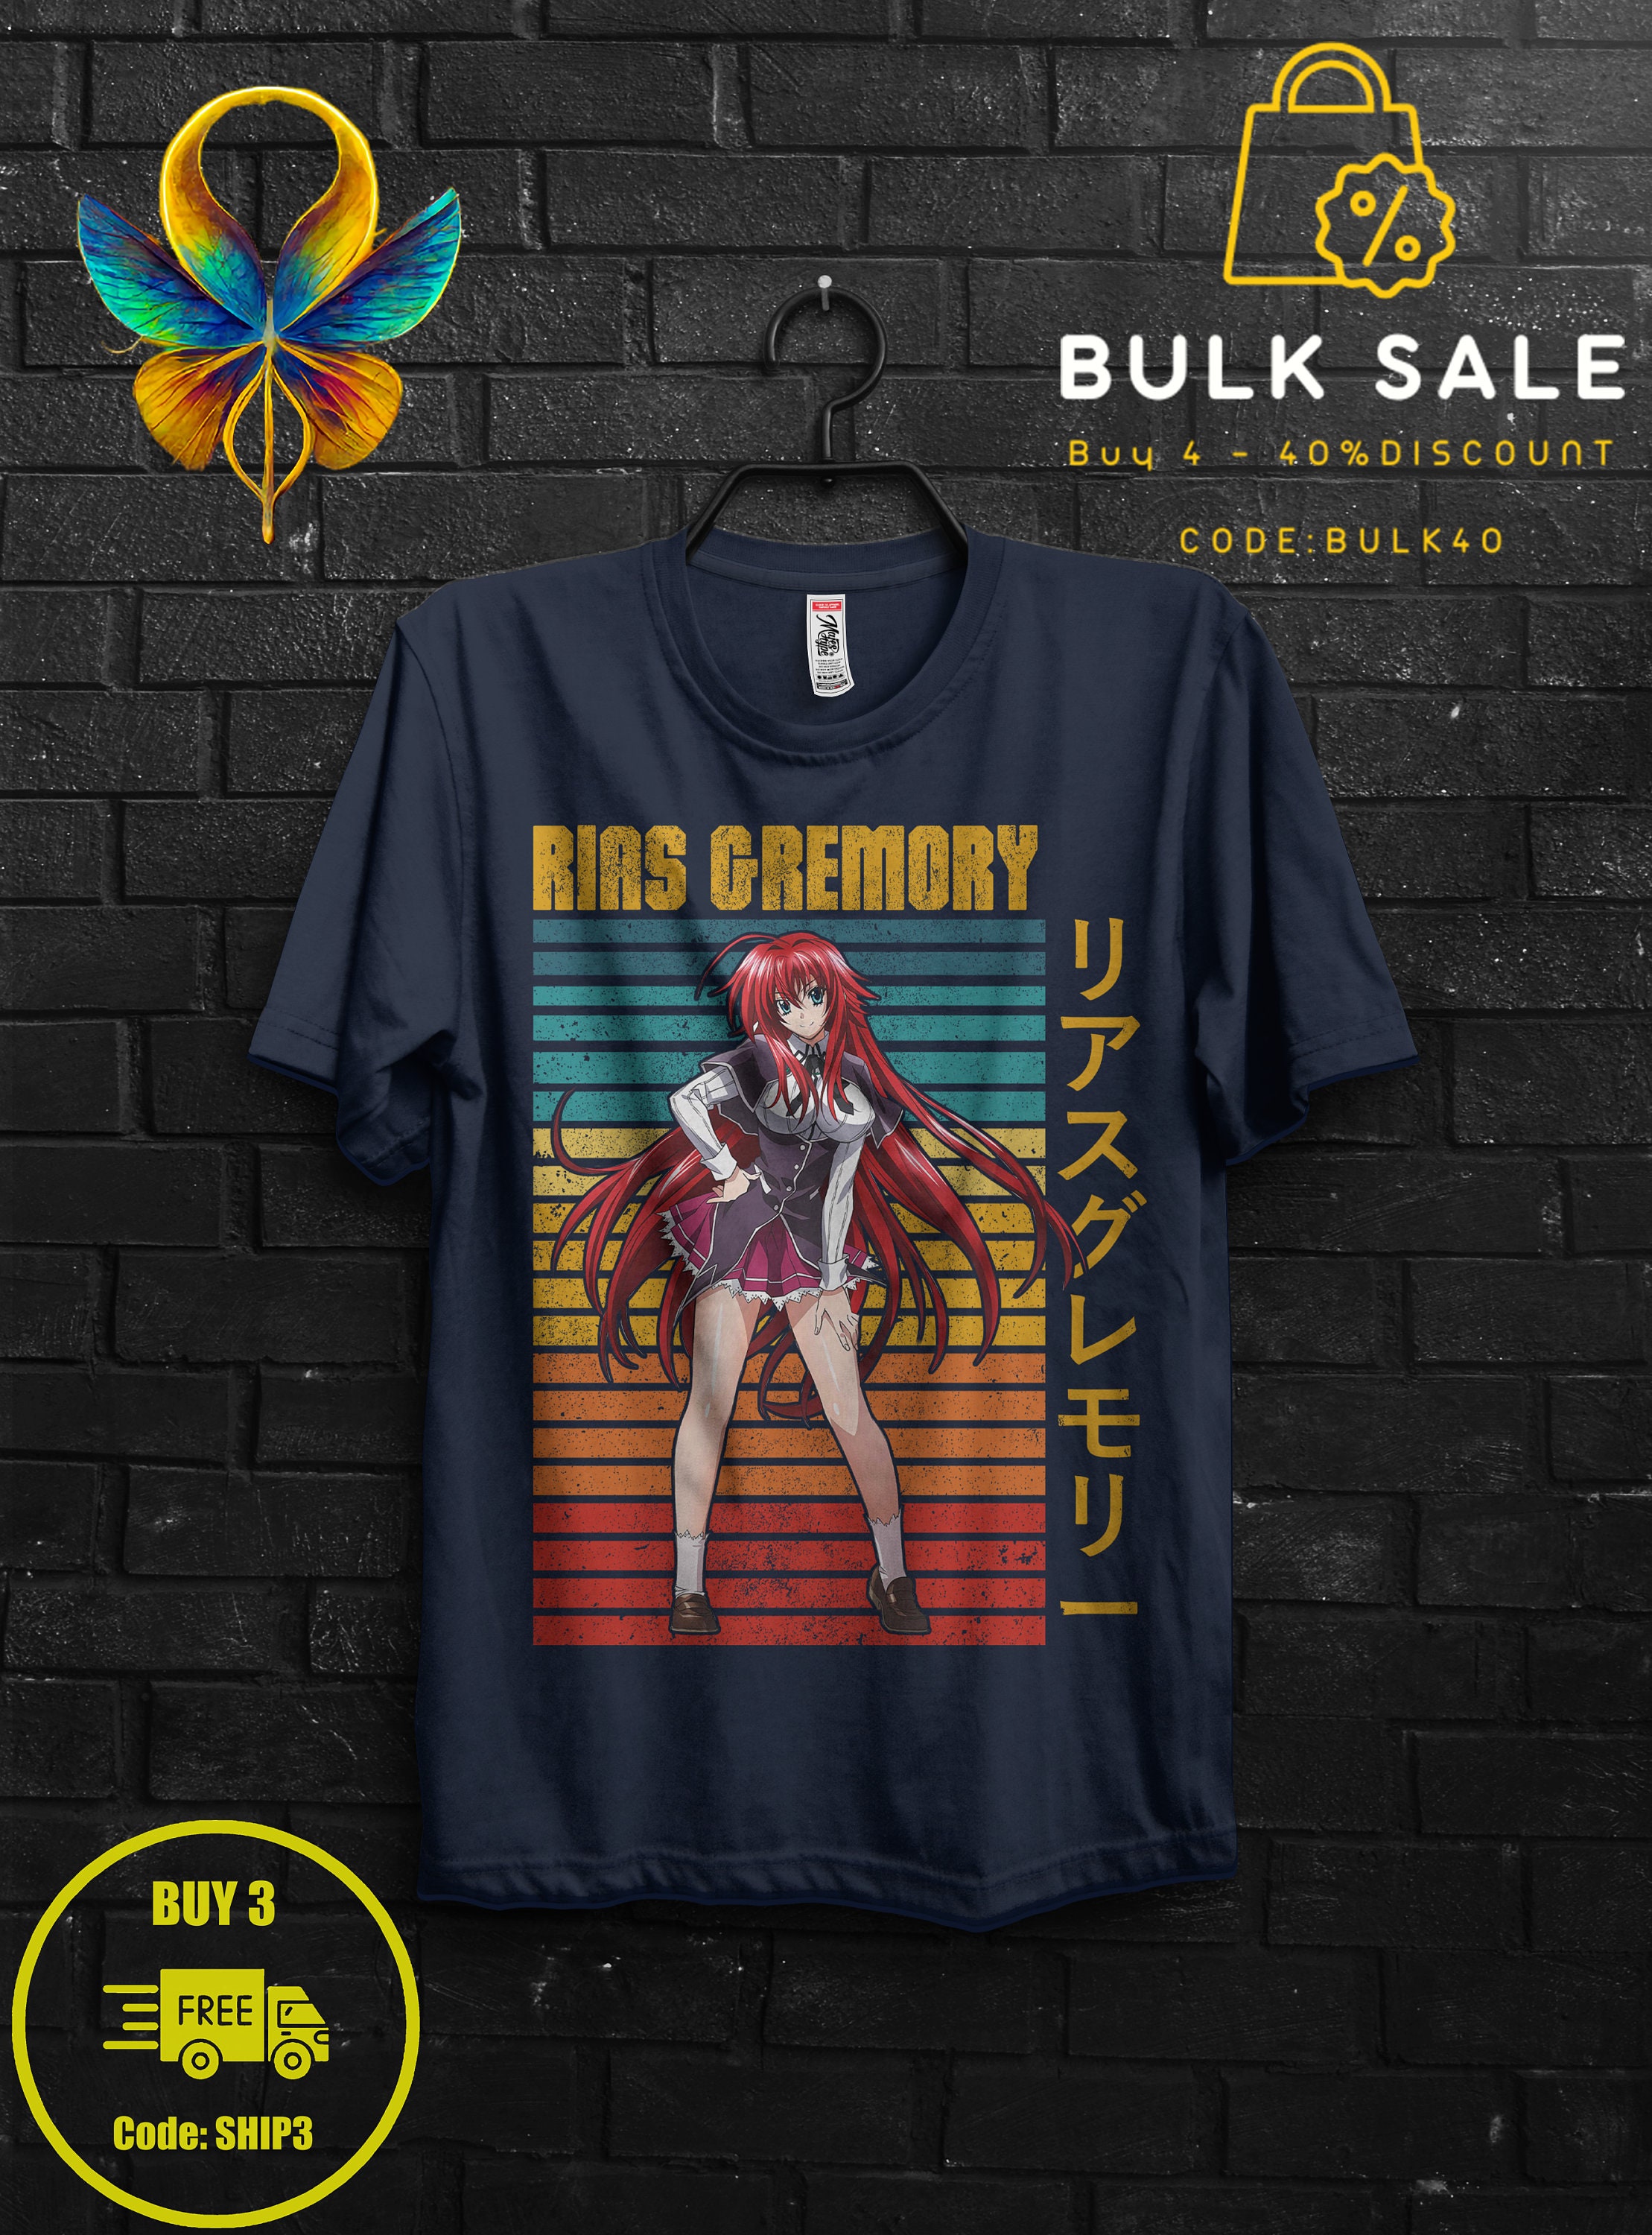 Rias Gremory Shirt Anime Gift Cosplay For Girl,Rossweisse Tshirt For Sitri,Issei Hyoudou Sweat,Xenovia Appareal For Her,High School DxD Tee 1586077724